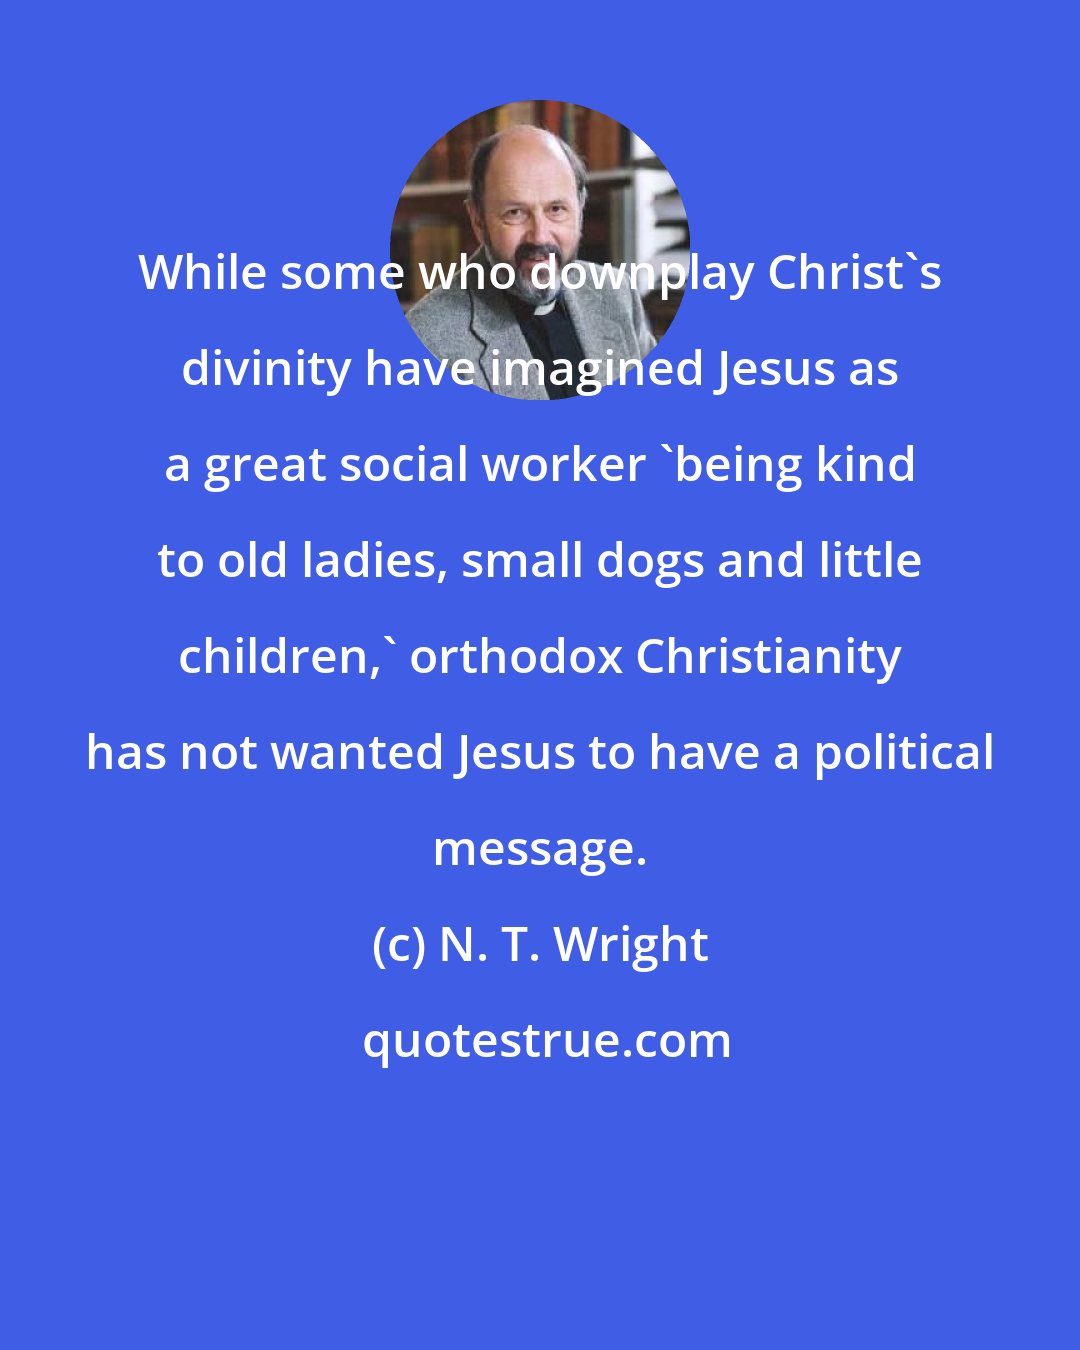 N. T. Wright: While some who downplay Christ's divinity have imagined Jesus as a great social worker 'being kind to old ladies, small dogs and little children,' orthodox Christianity has not wanted Jesus to have a political message.